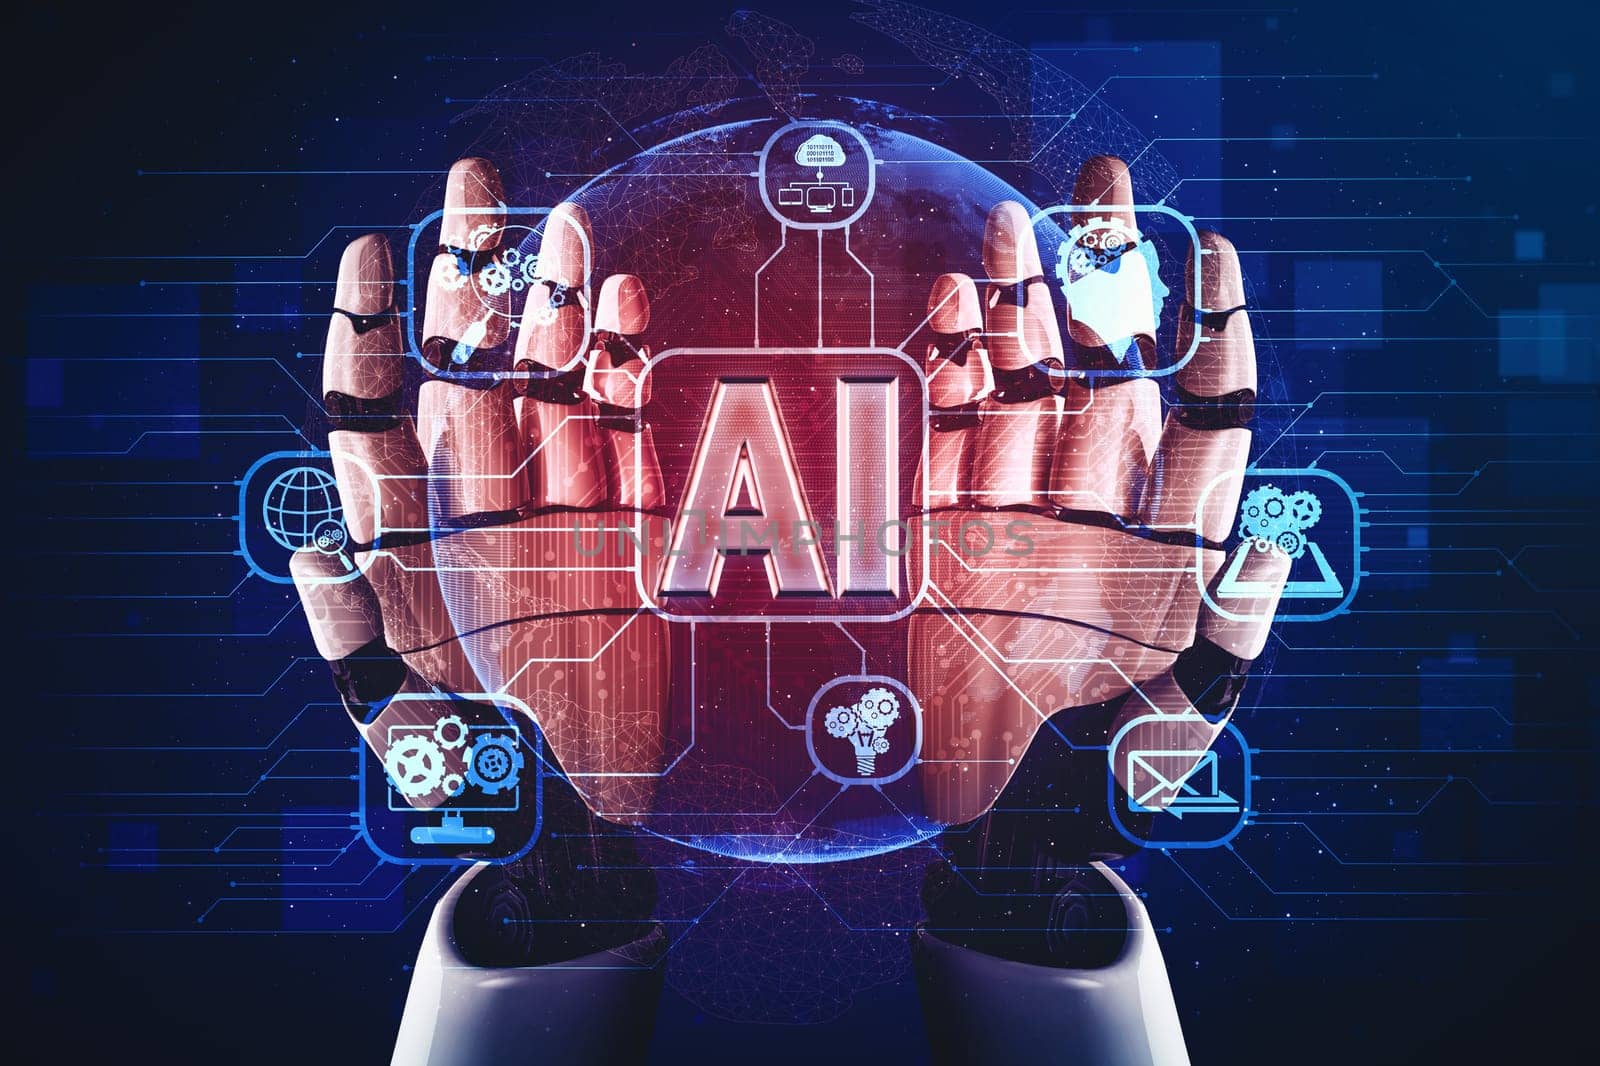 XAI 3D rendering artificial intelligence AI research of droid robot and cyborg development for future of people living. Digital data mining and machine learning technology design for computer brain.